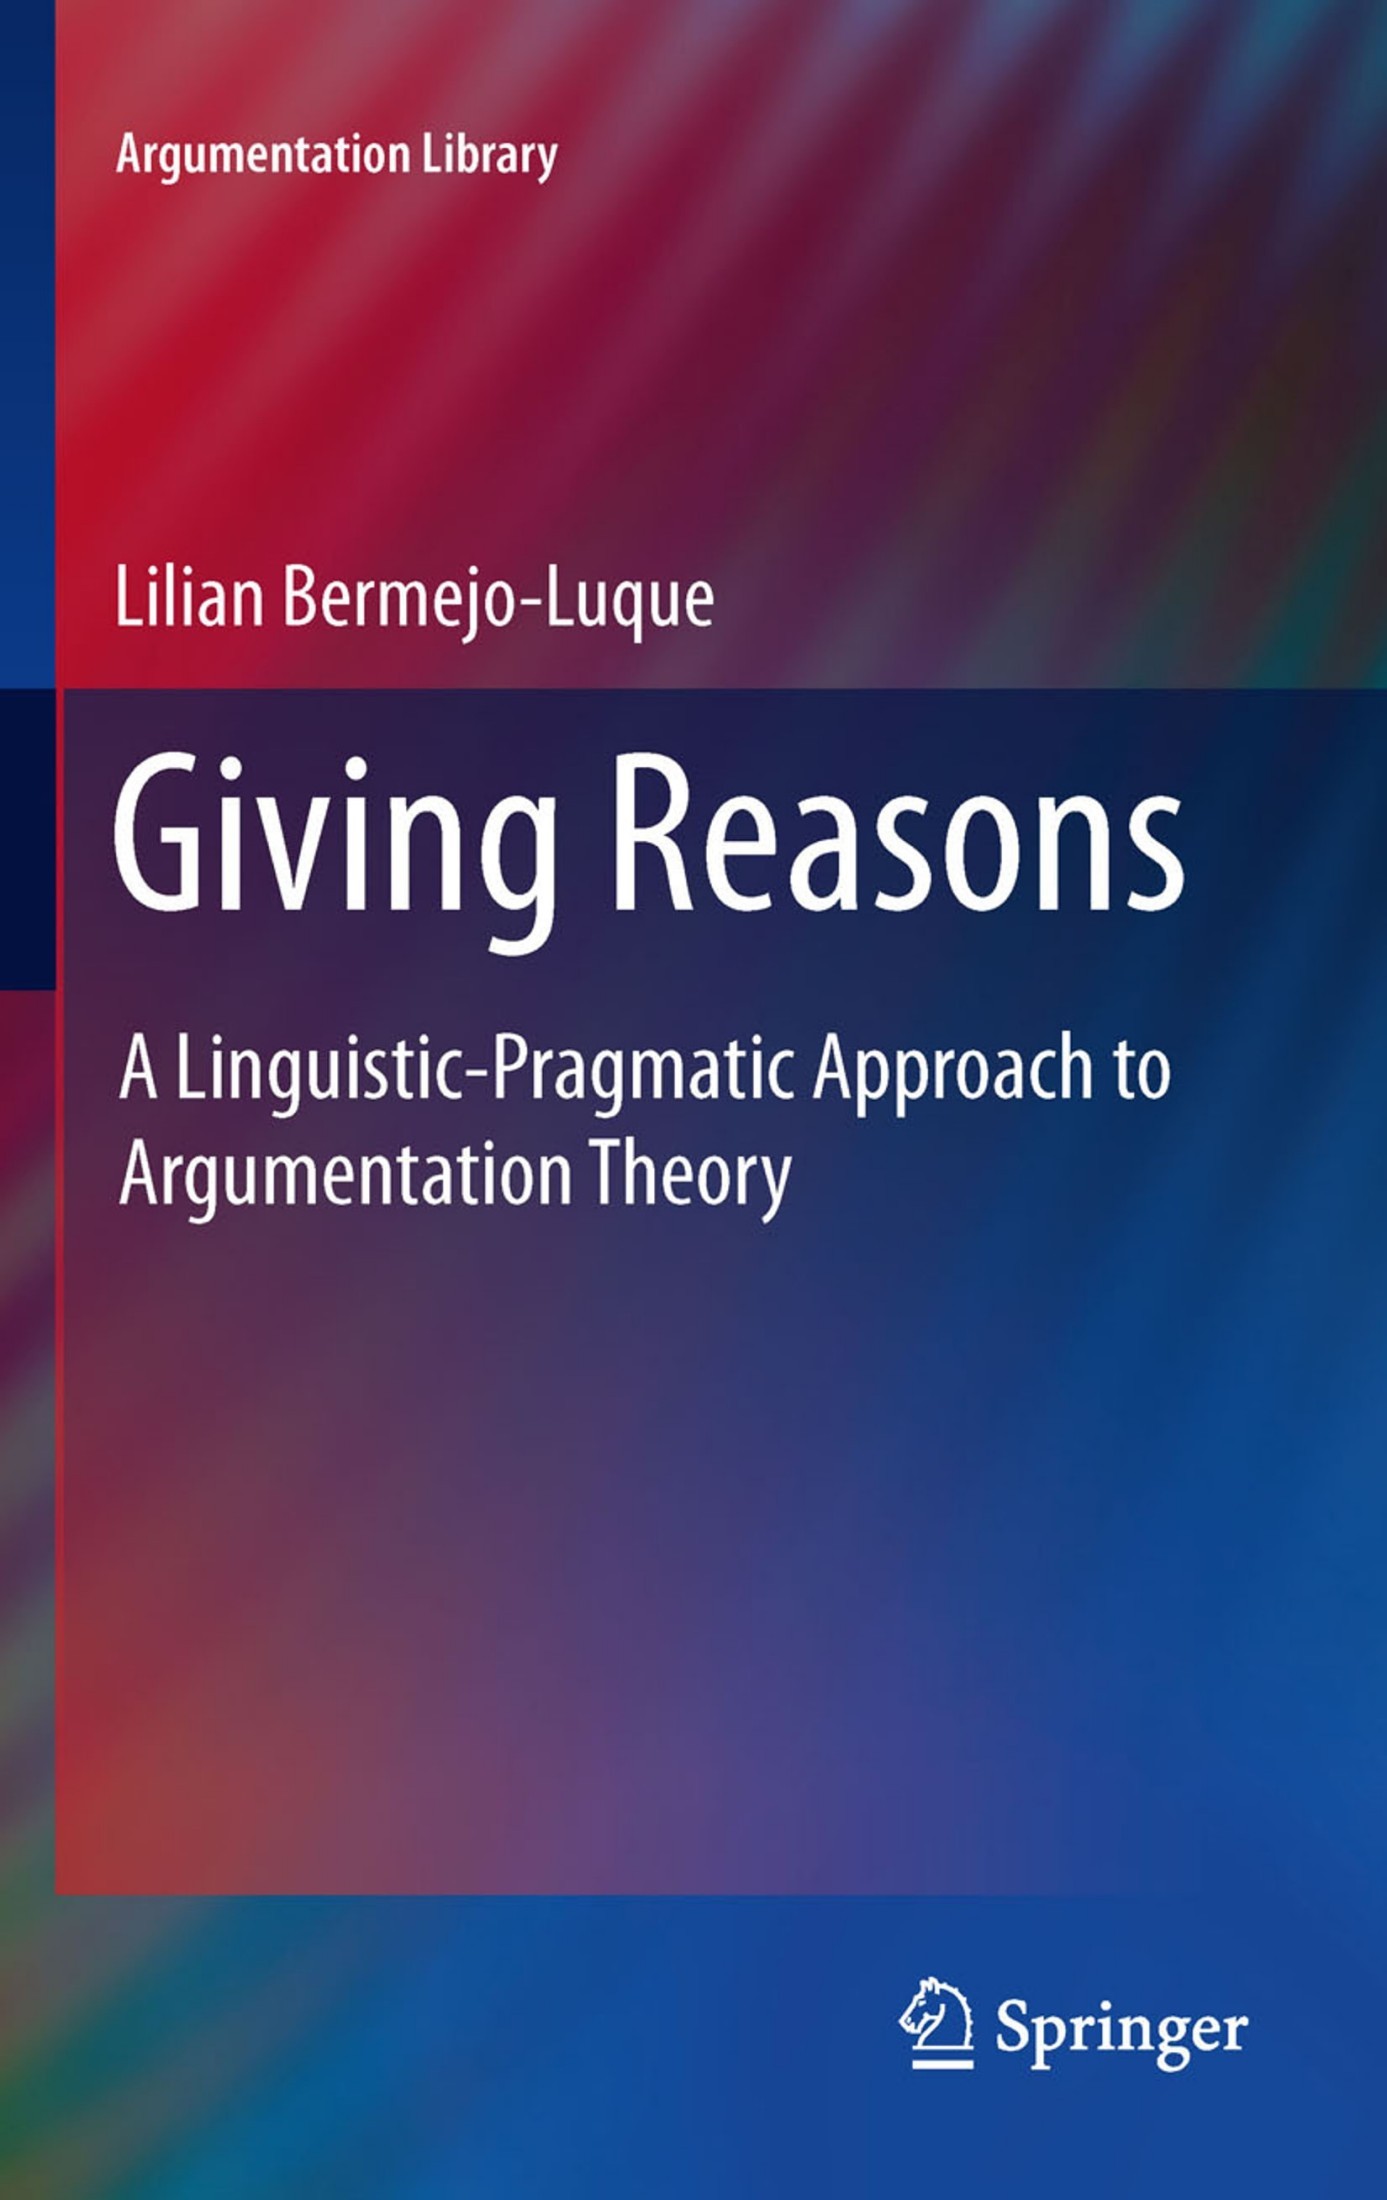 Giving Reasons: A Linguistic-Pragmatic Approach to Argumentation Theory